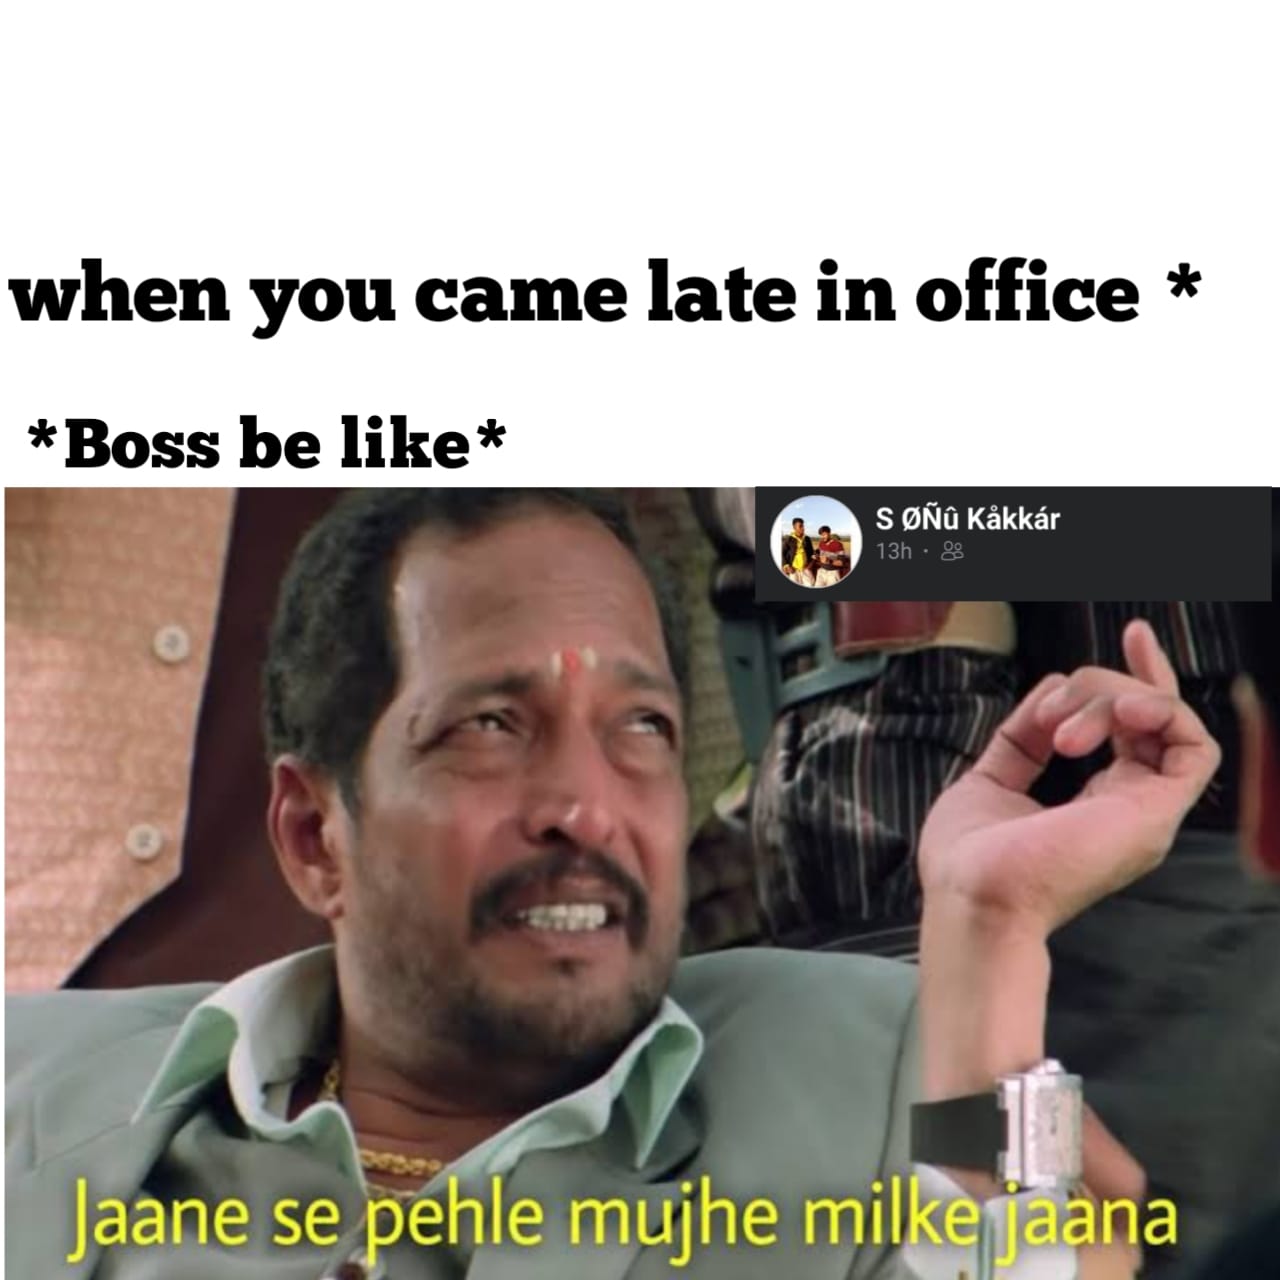 When you came late in office Boss be like meme.jpg